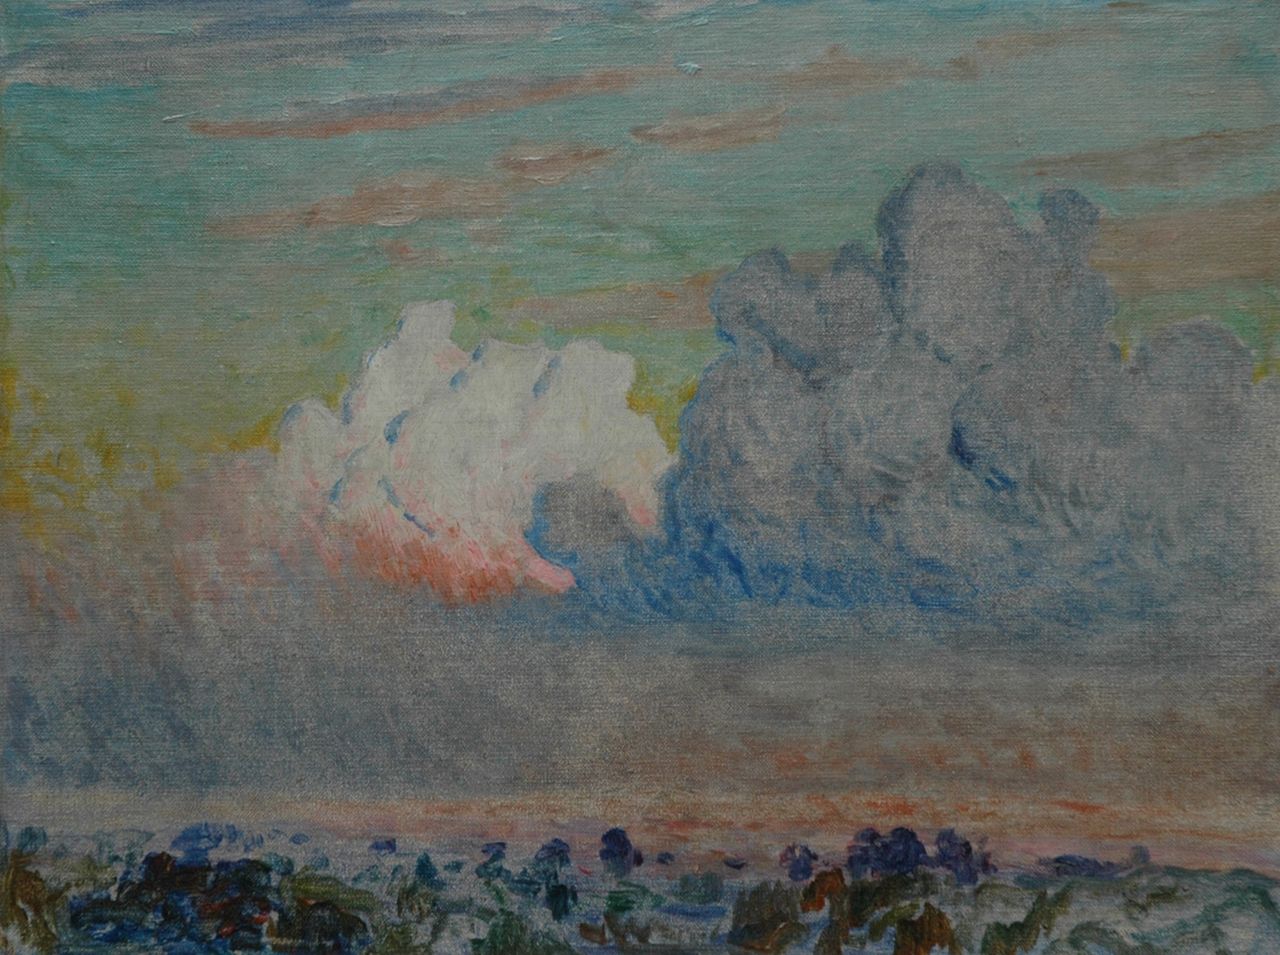 Claus E.  | Emile Claus, 'Torenwolken', oil on canvas laid down on painter's board 26.5 x 35.5 cm, Executed ca. 1910-1920